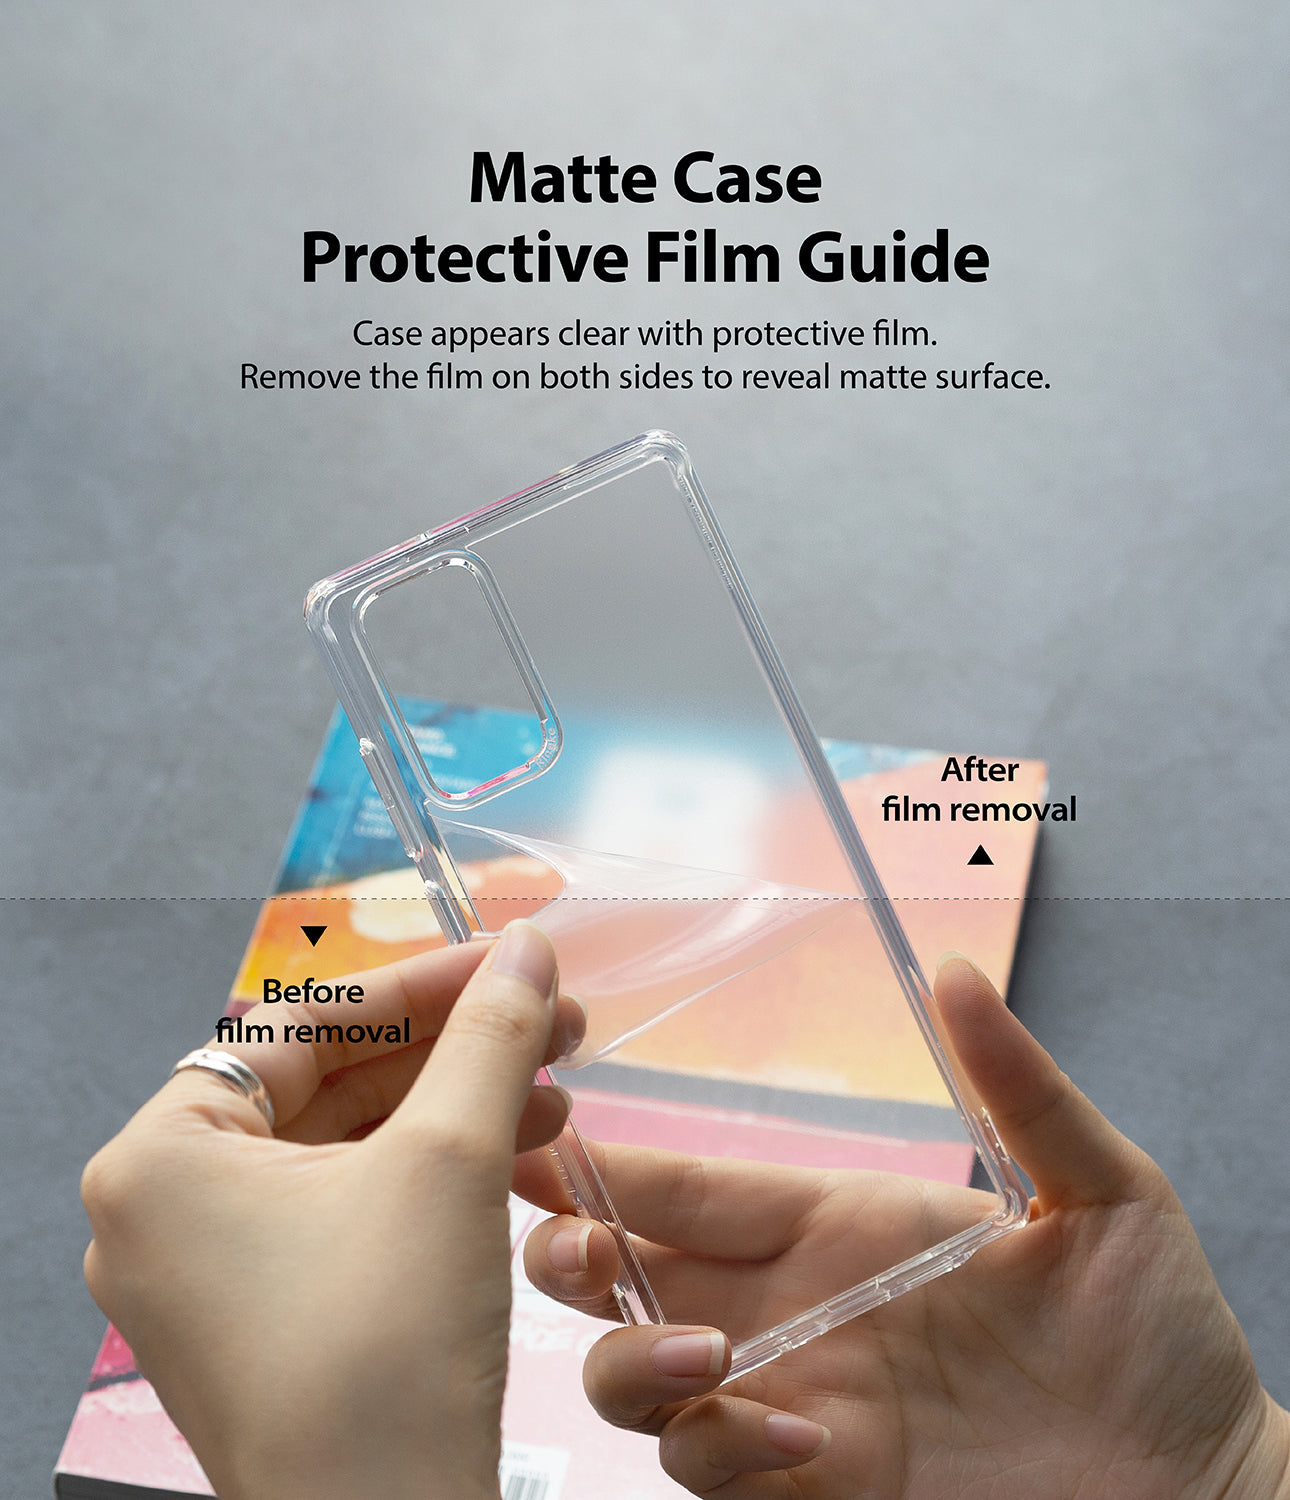 case appears clear with protective film. remove the film on both sides to reveal matte surface